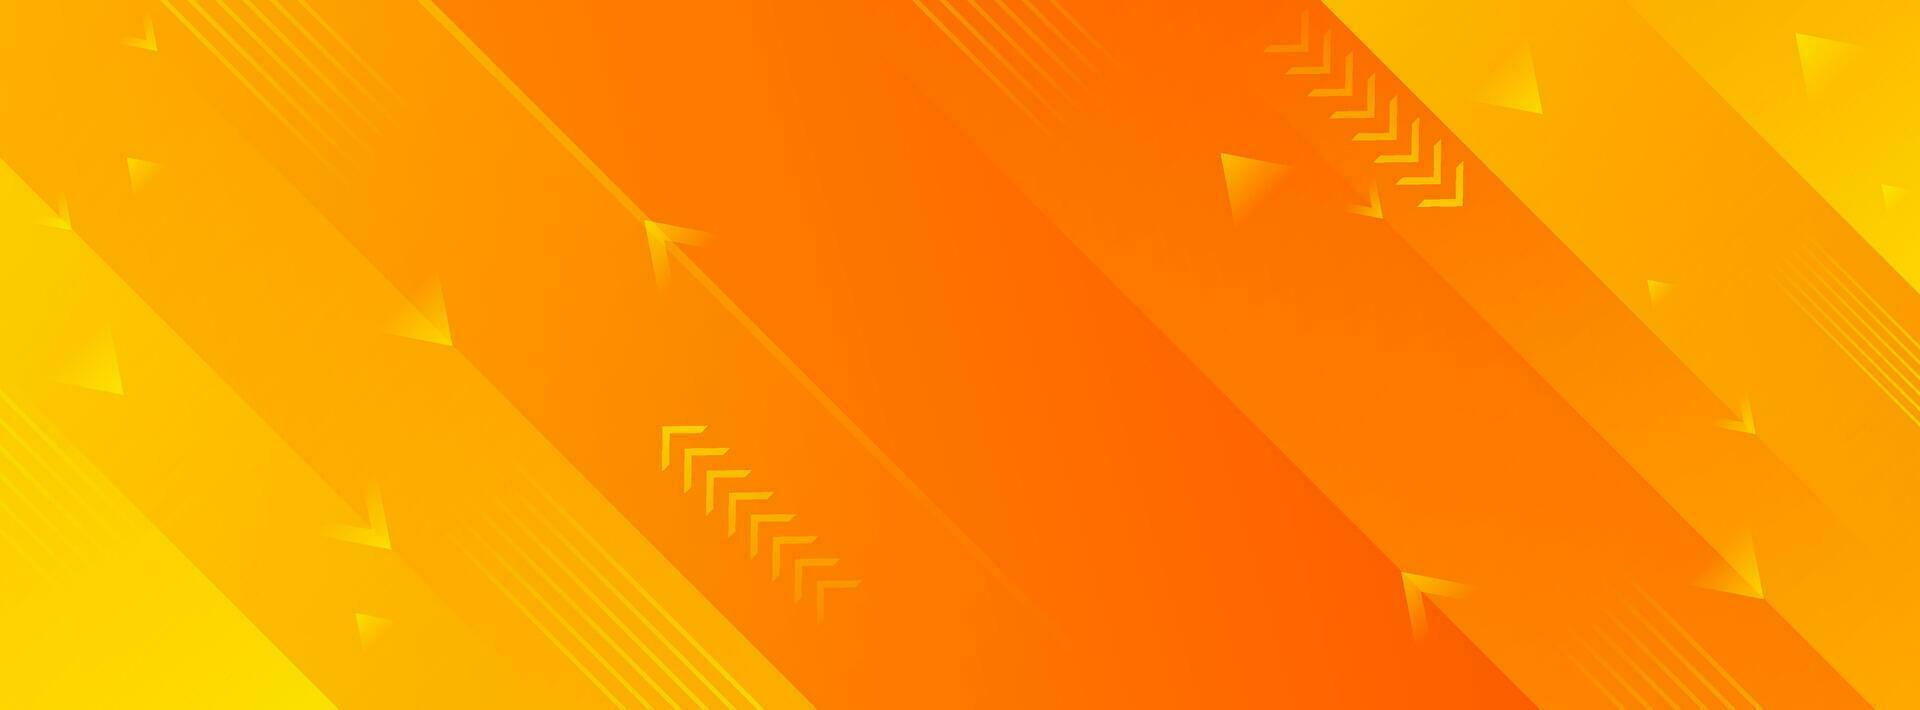 Banner background abstract .Colorful. Orange and yellow gradation. Element memphis. Trendy vector